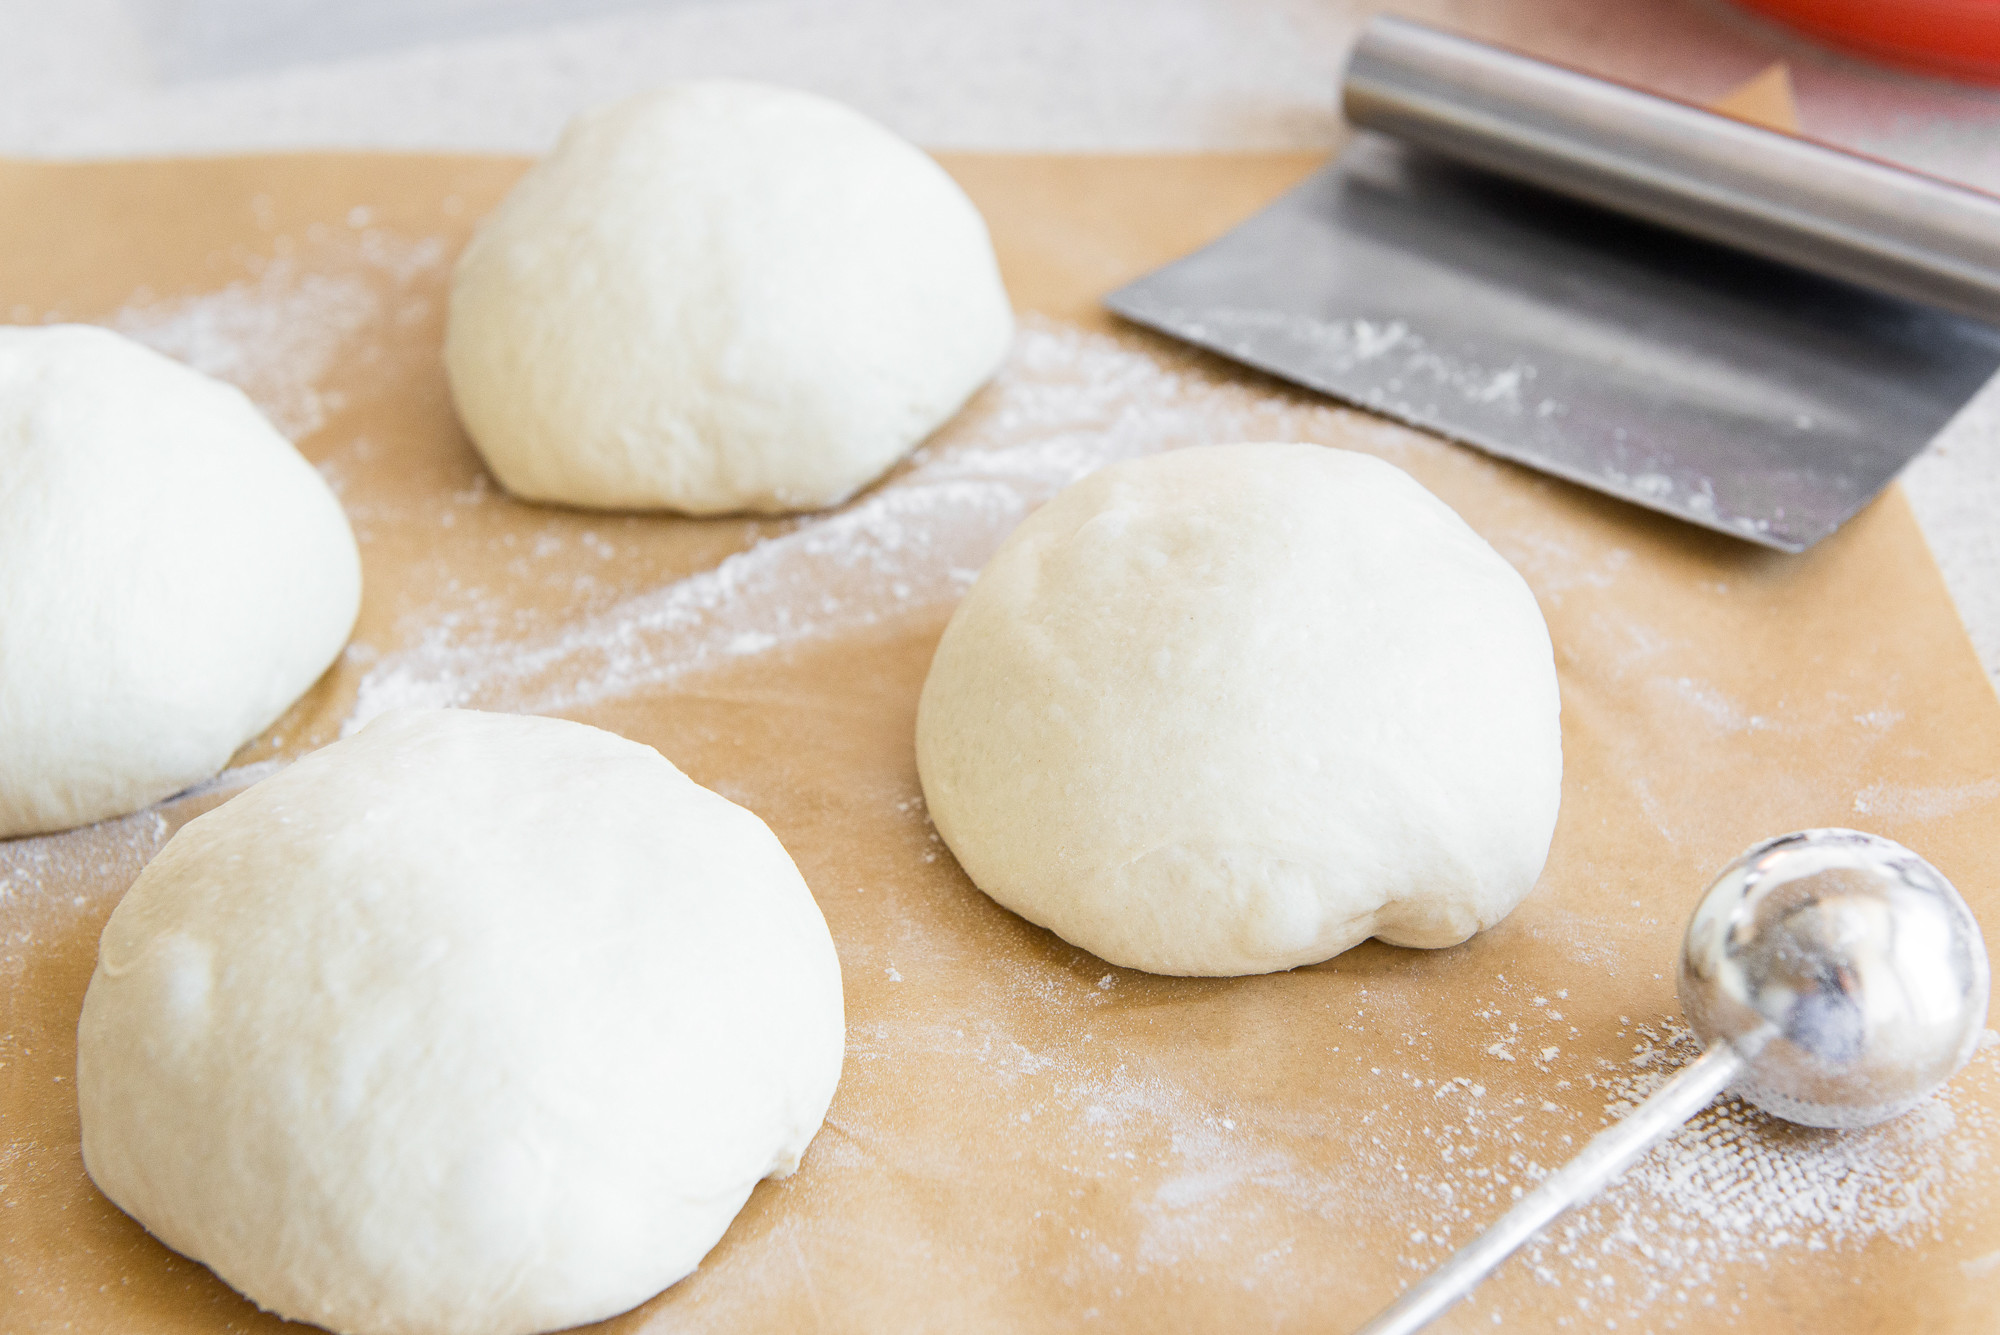 Freezing Pizza Dough
 How to Make and Freeze Pizza Dough